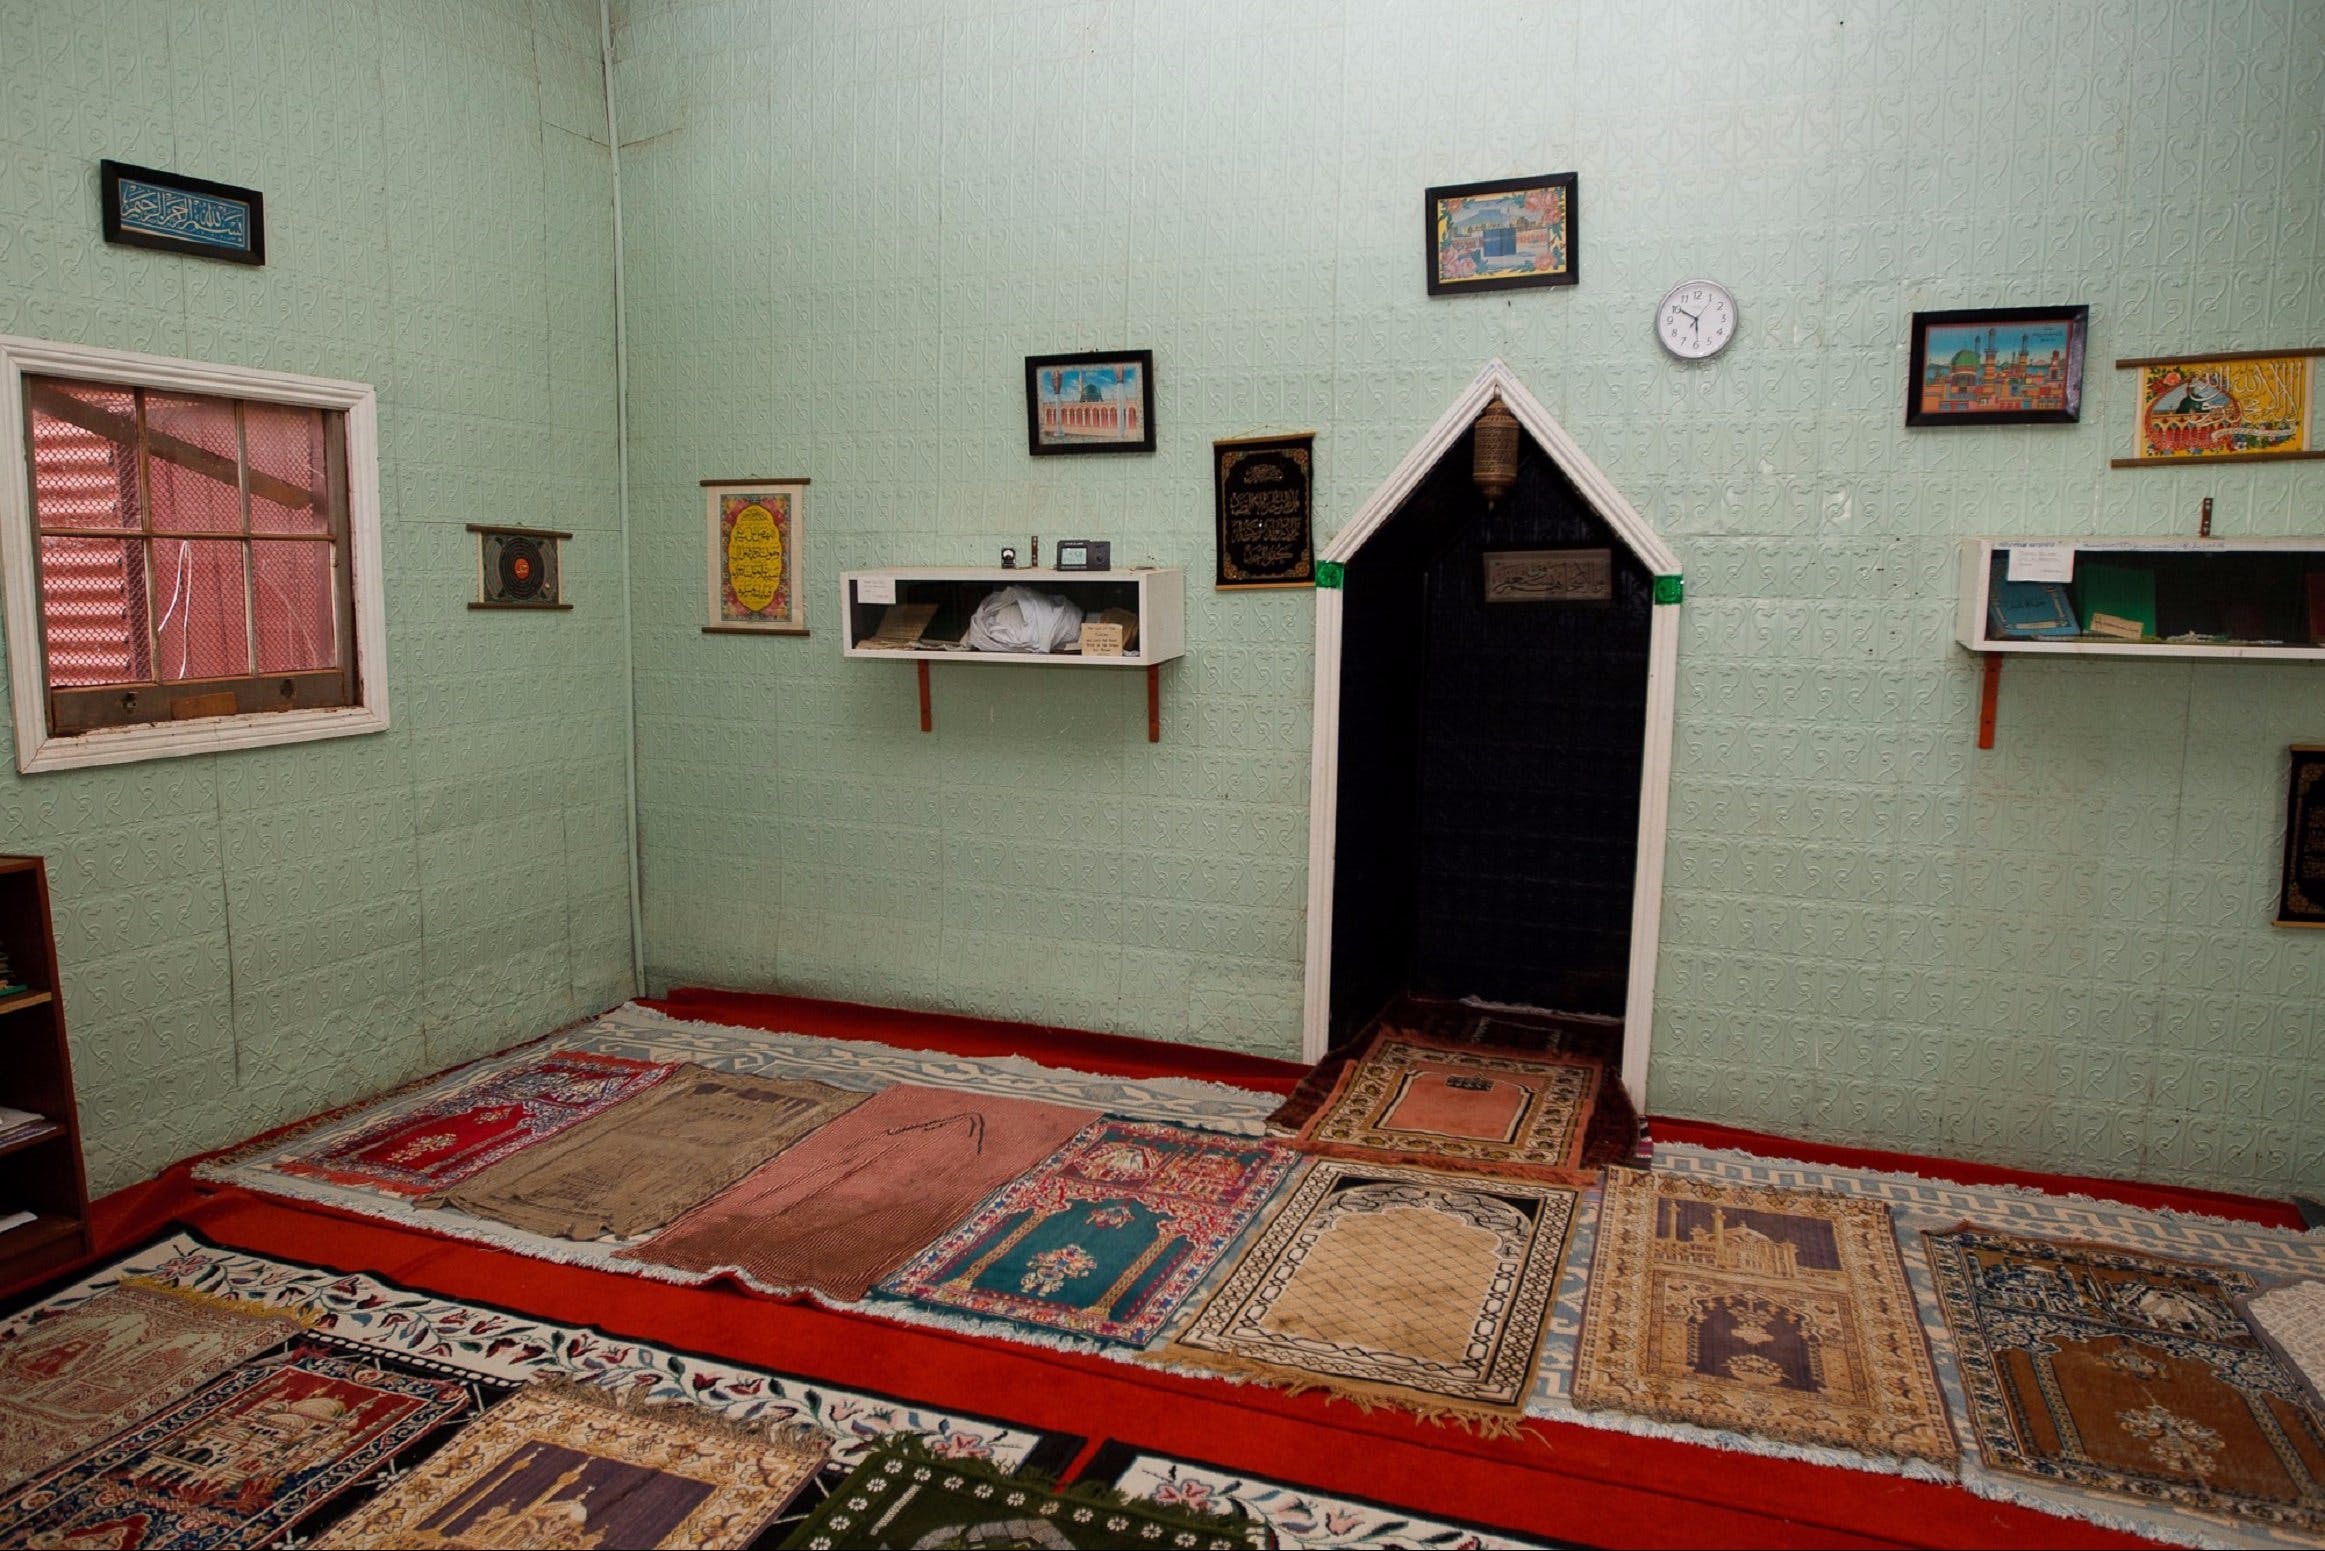 Afghan Mosque - Accommodation in Surfers Paradise